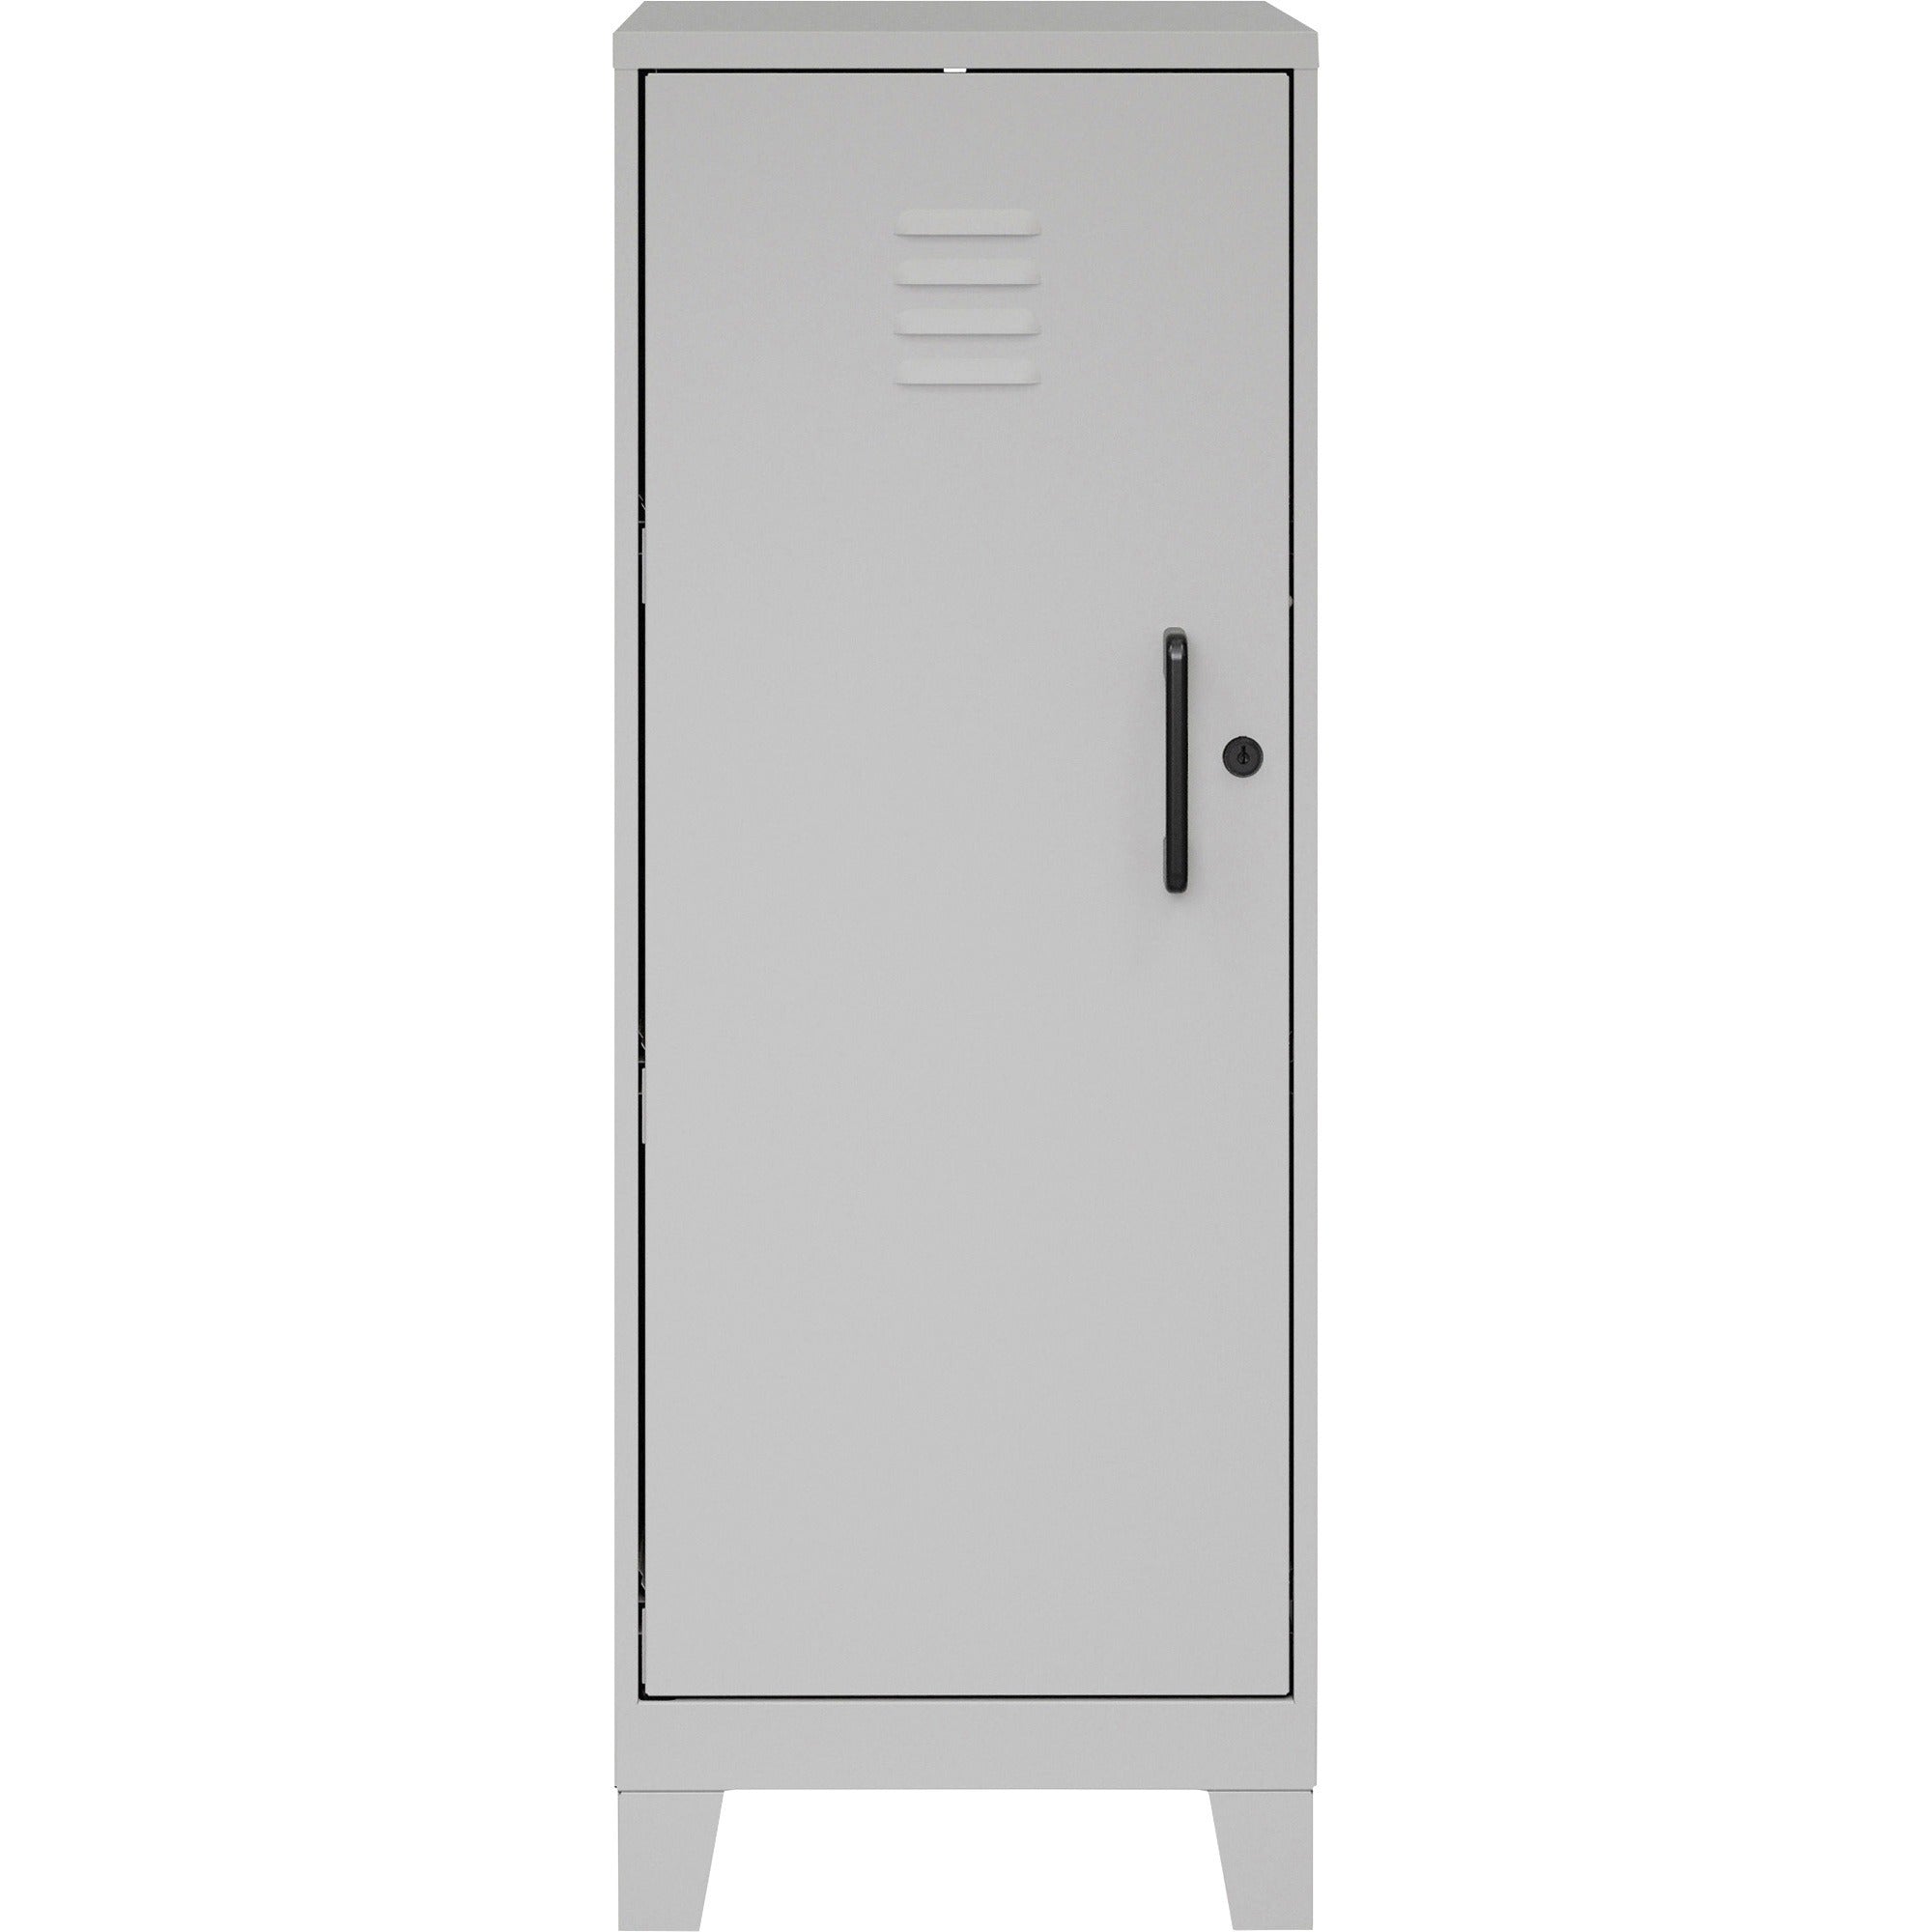 nusparc-personal-locker-3-shelves-for-office-home-sport-equipments-toy-game-classroom-playroom-basement-garage-overall-size-425-x-142-x-18-silver-steel-taa-compliant_nprsl318zzsr - 2